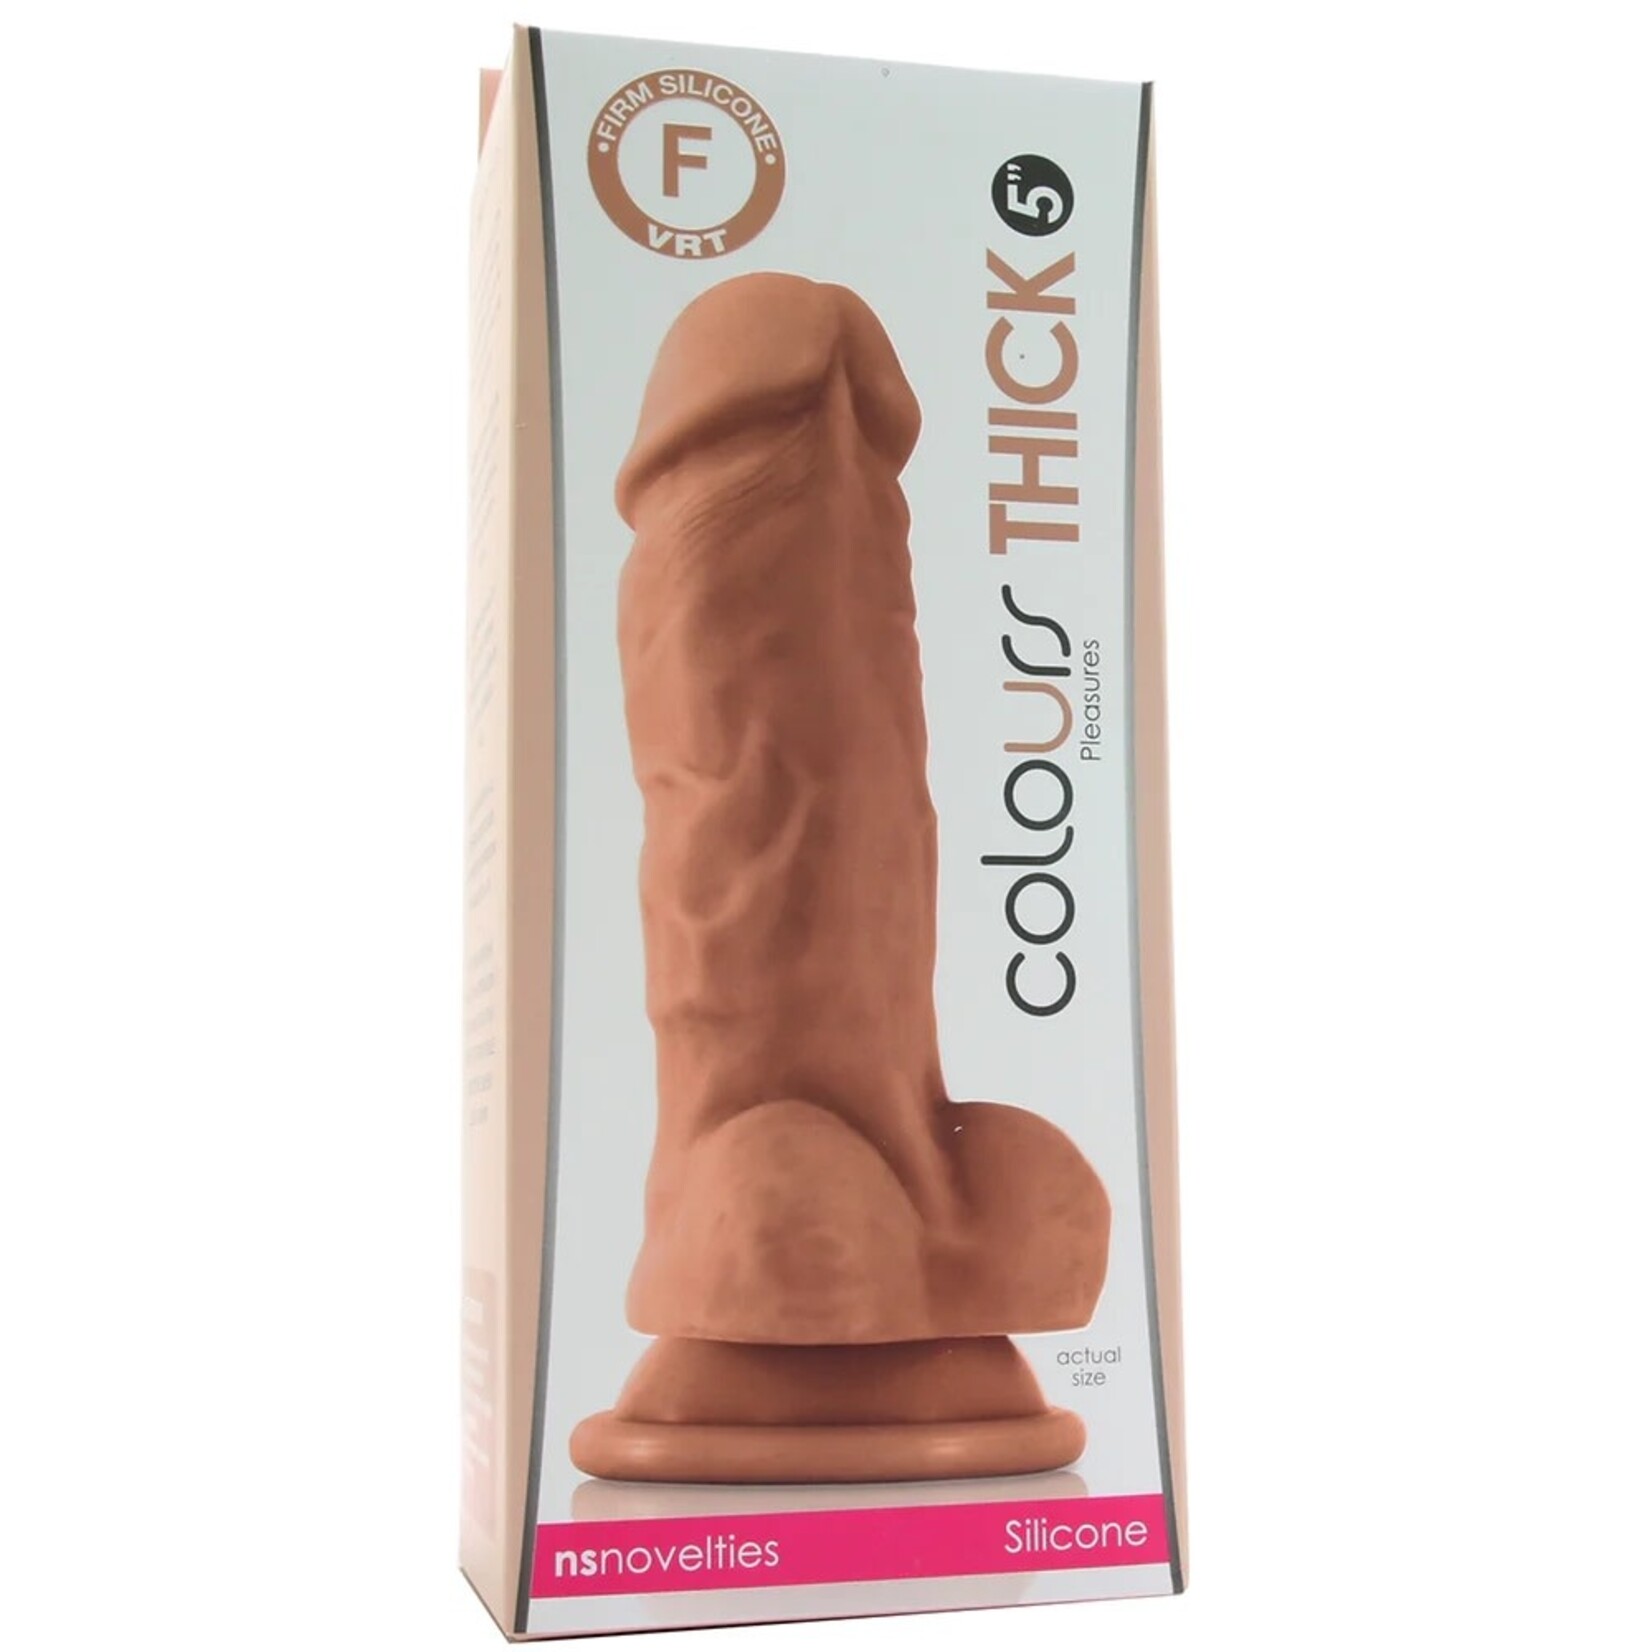 NSNOVELTIES COLOURS THICK PLEASURES 5 INCH SILICONE DILDO IN VANILLA